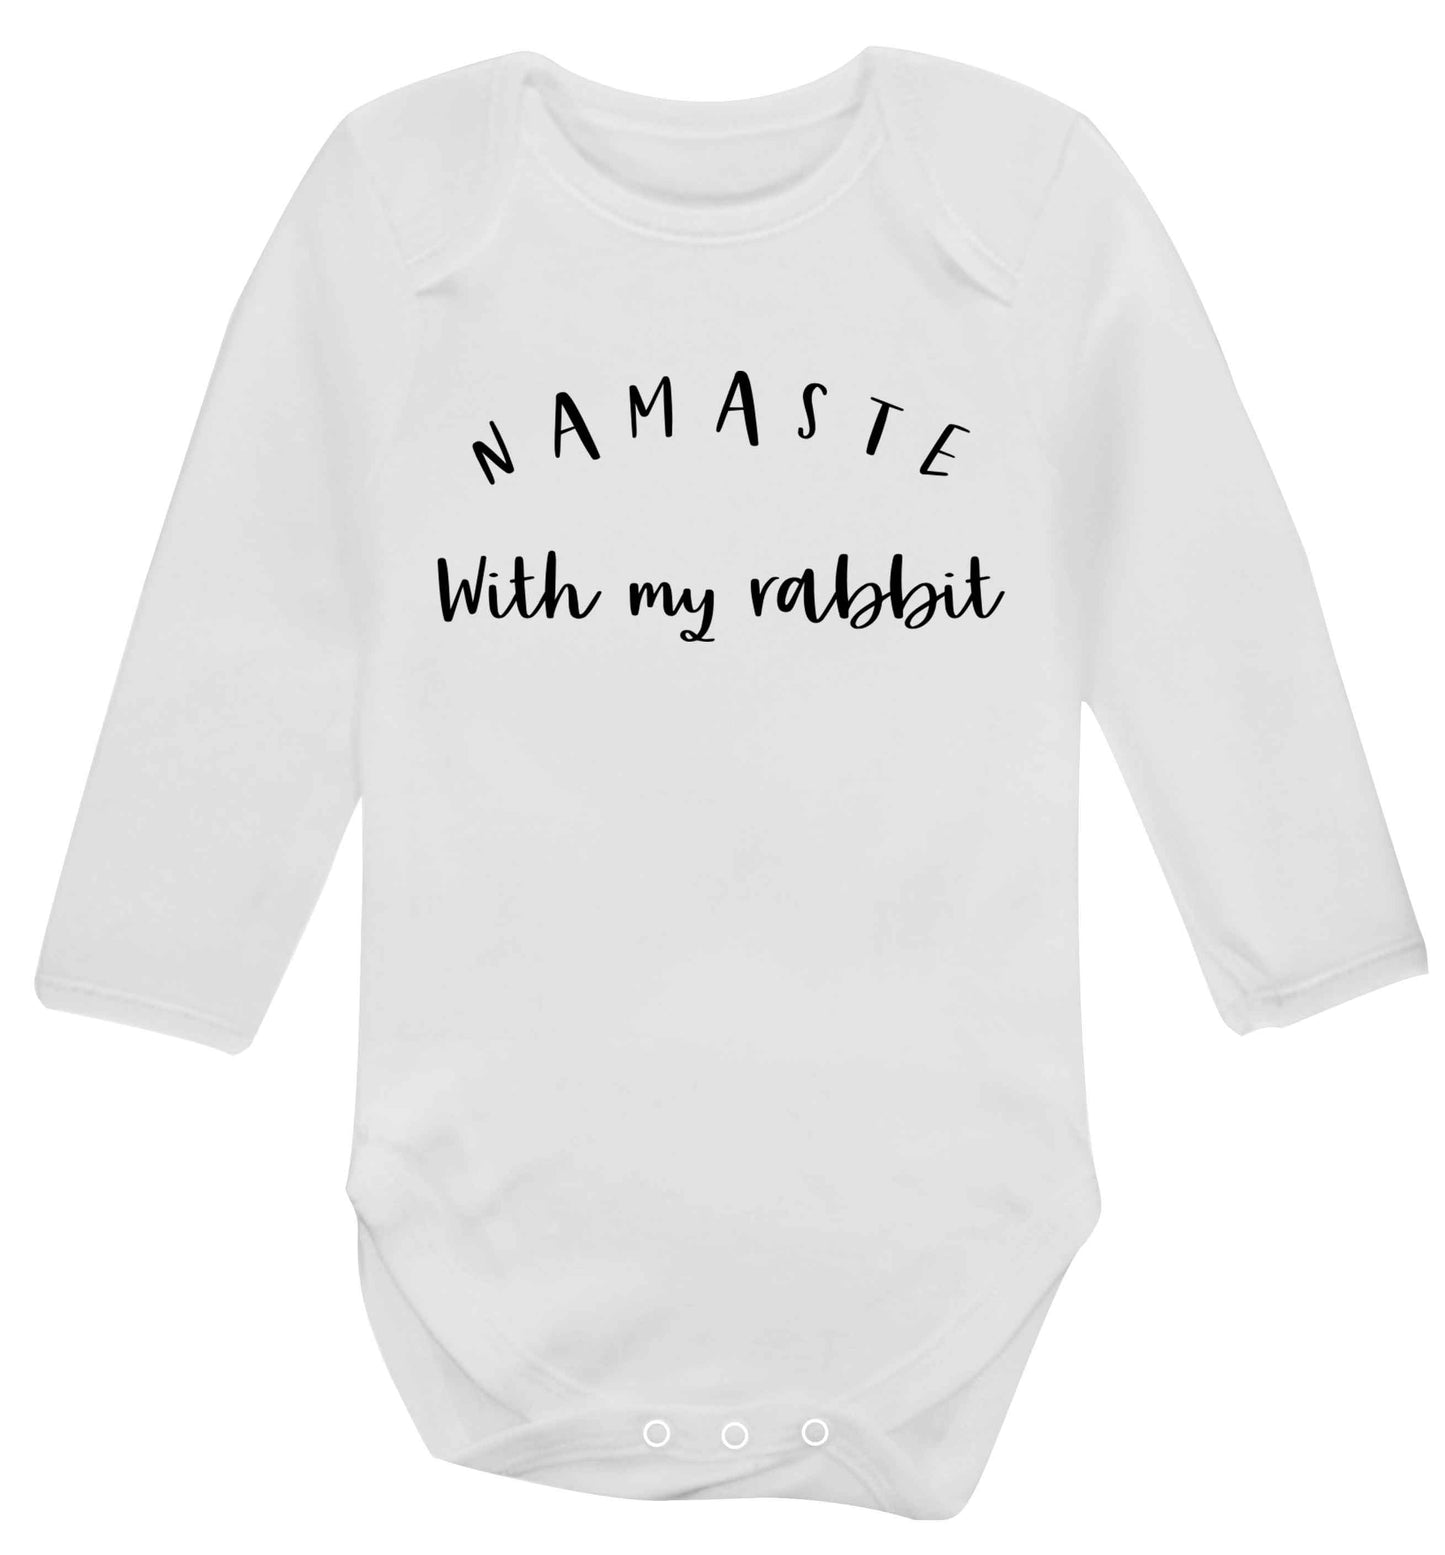 Namaste with my rabbit Baby Vest long sleeved white 6-12 months